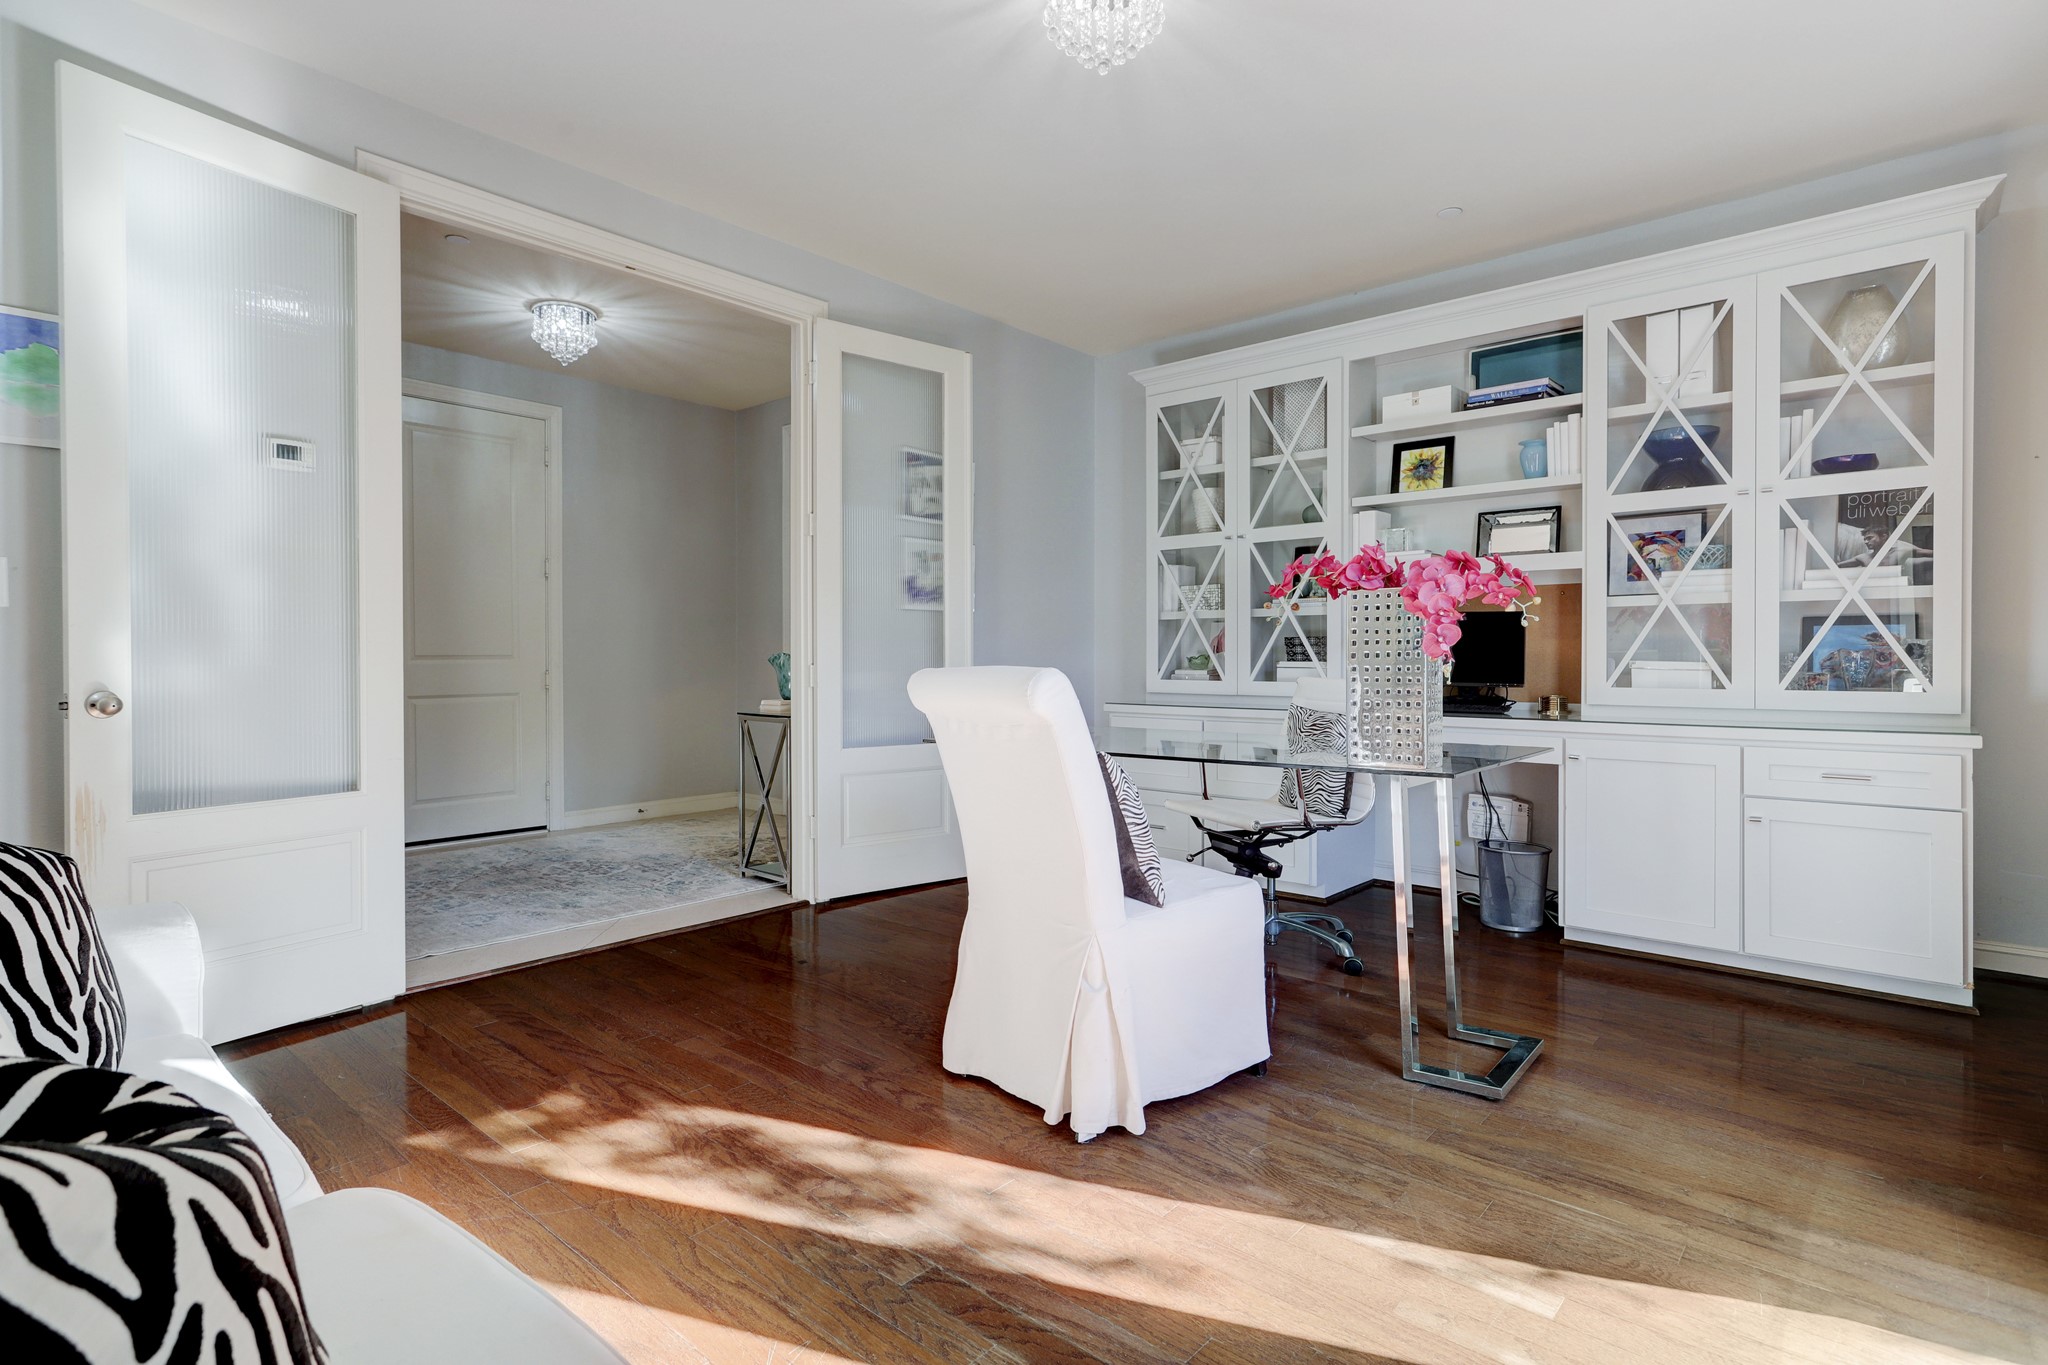 Currently utilized as a home office, double doors allow this space to be closed off for privacy. Custom built-ins add storage, display space, function and interest to the room.